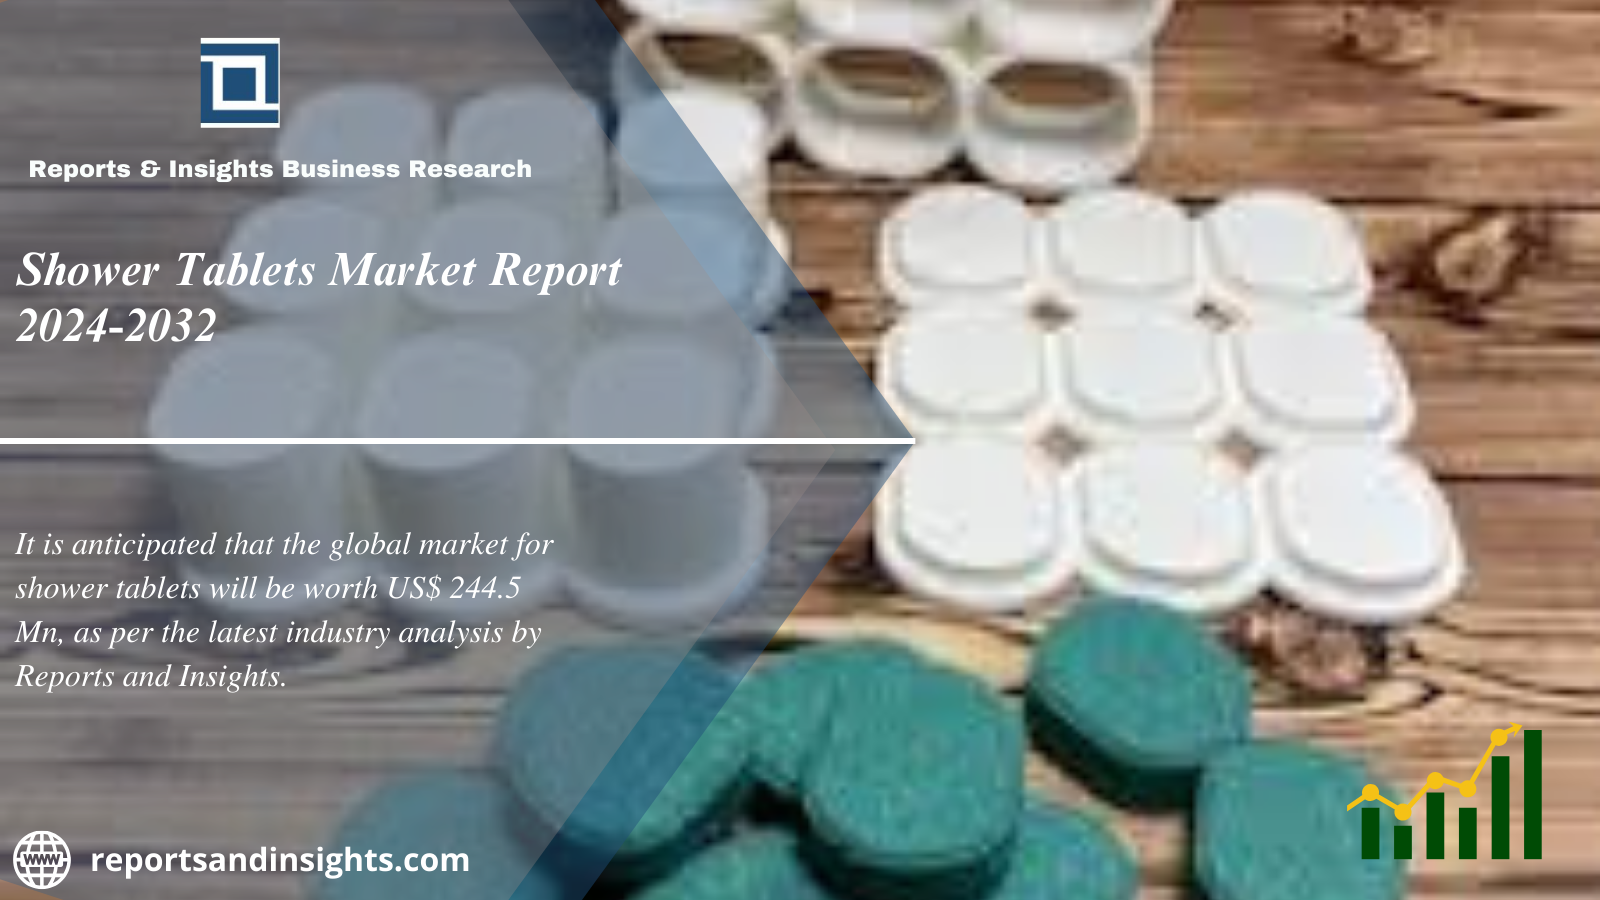 Shower Tablets Market 2024 to 2032: Share, Growth, Size, Trends and Report Analysis